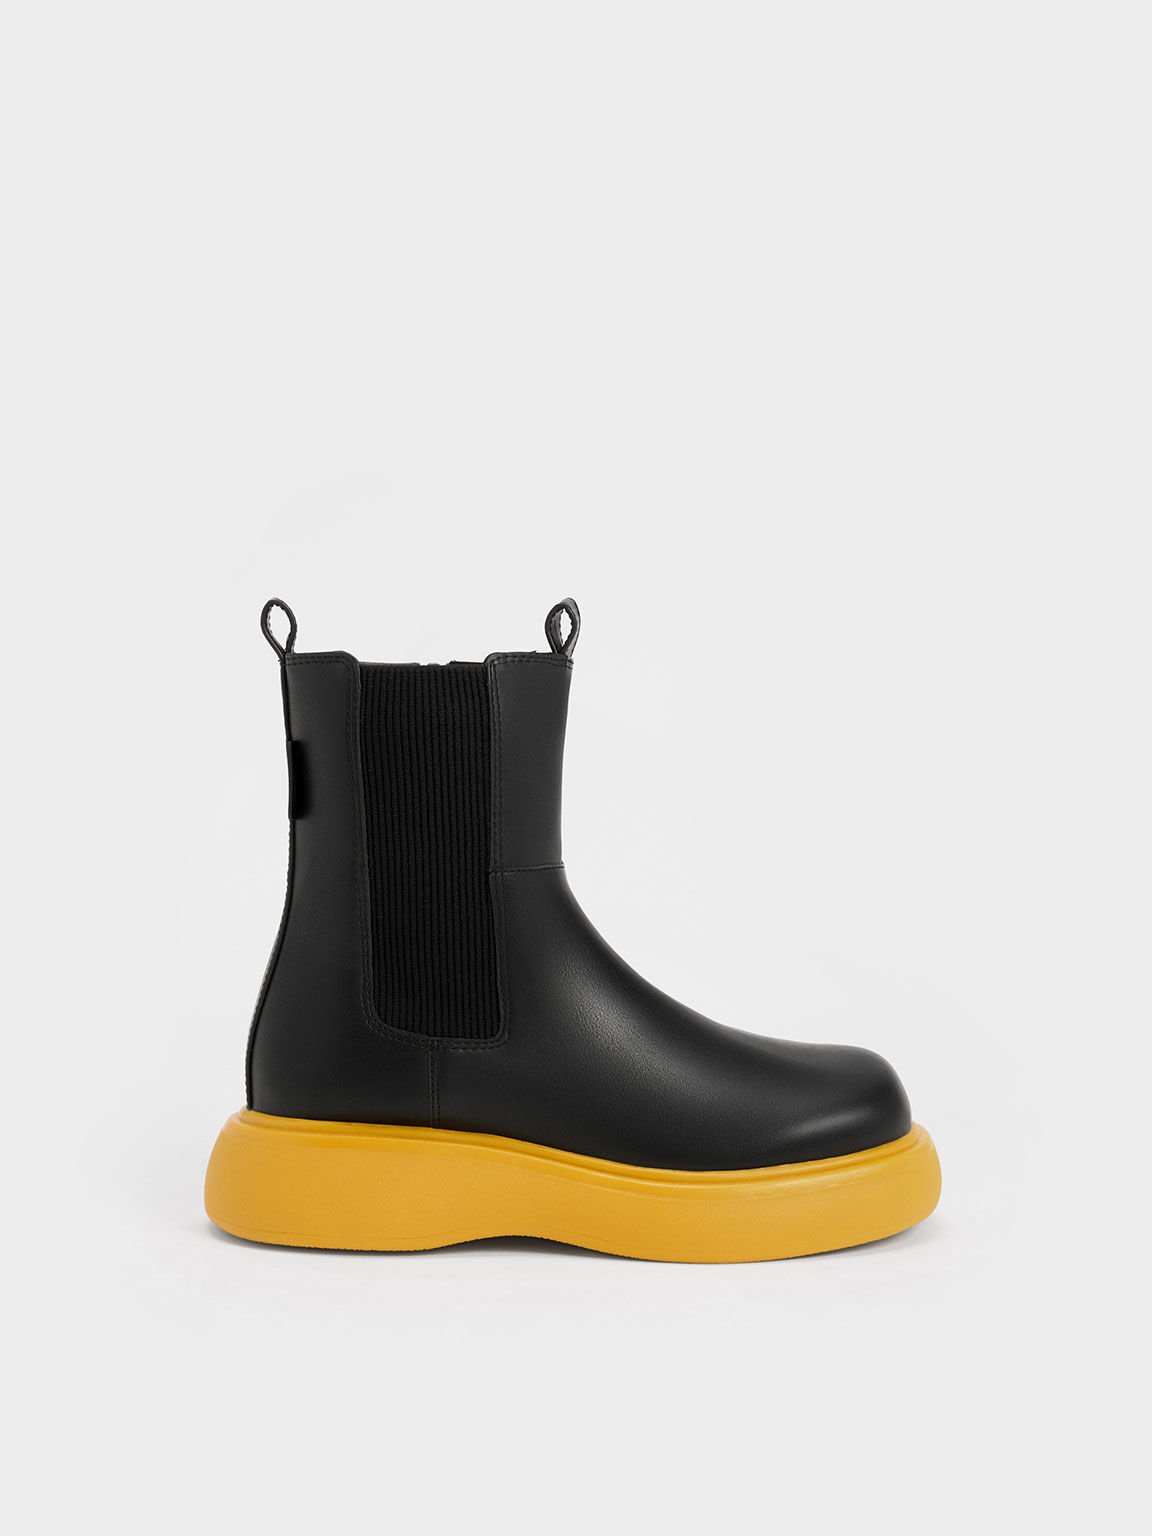 Double Pull Tab Chelsea Boots, Black, hi-res